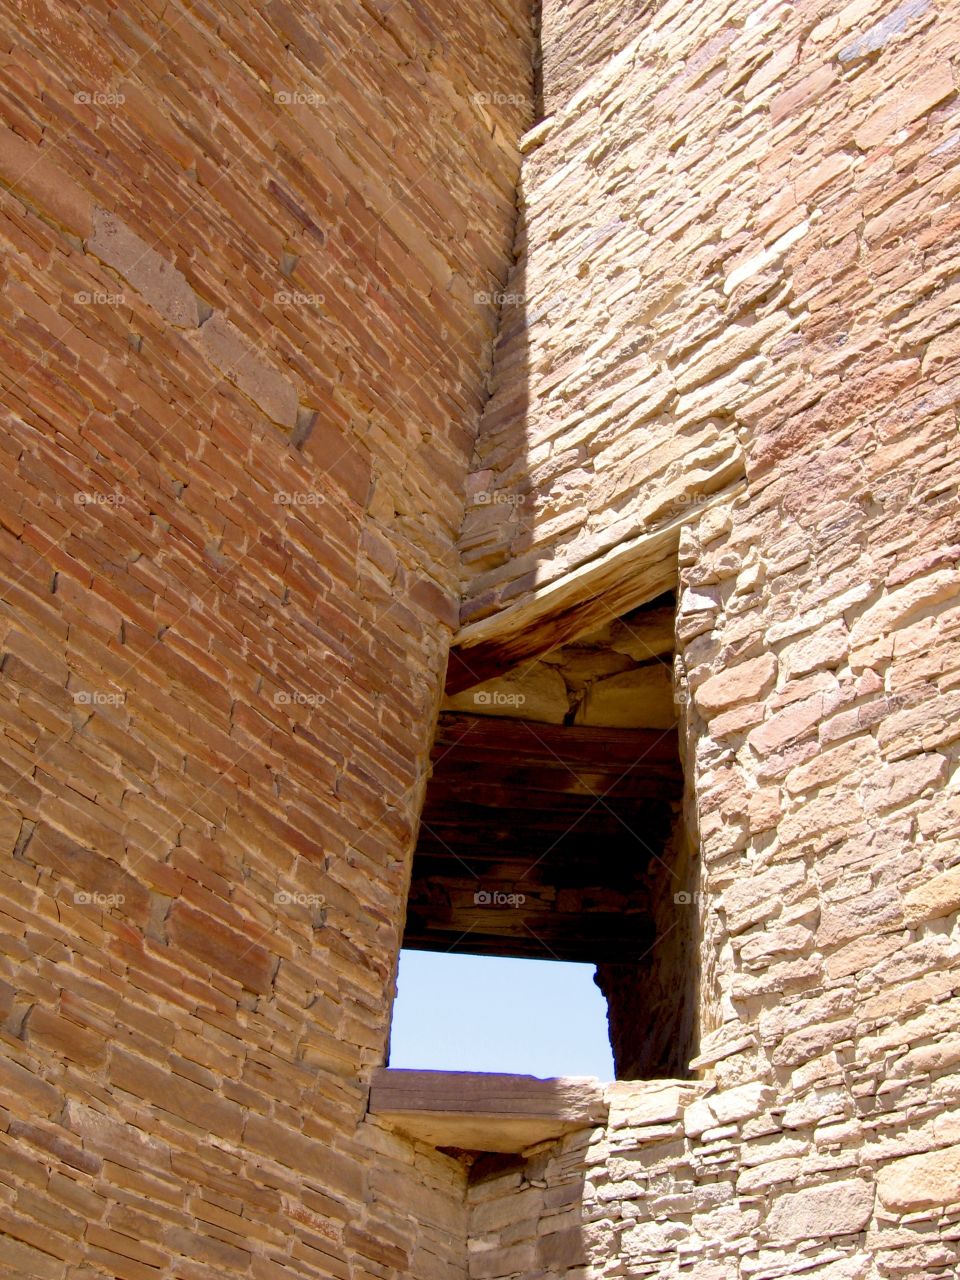 Window in the ruins, Chaco Culture National Historical Park, New Mexico 